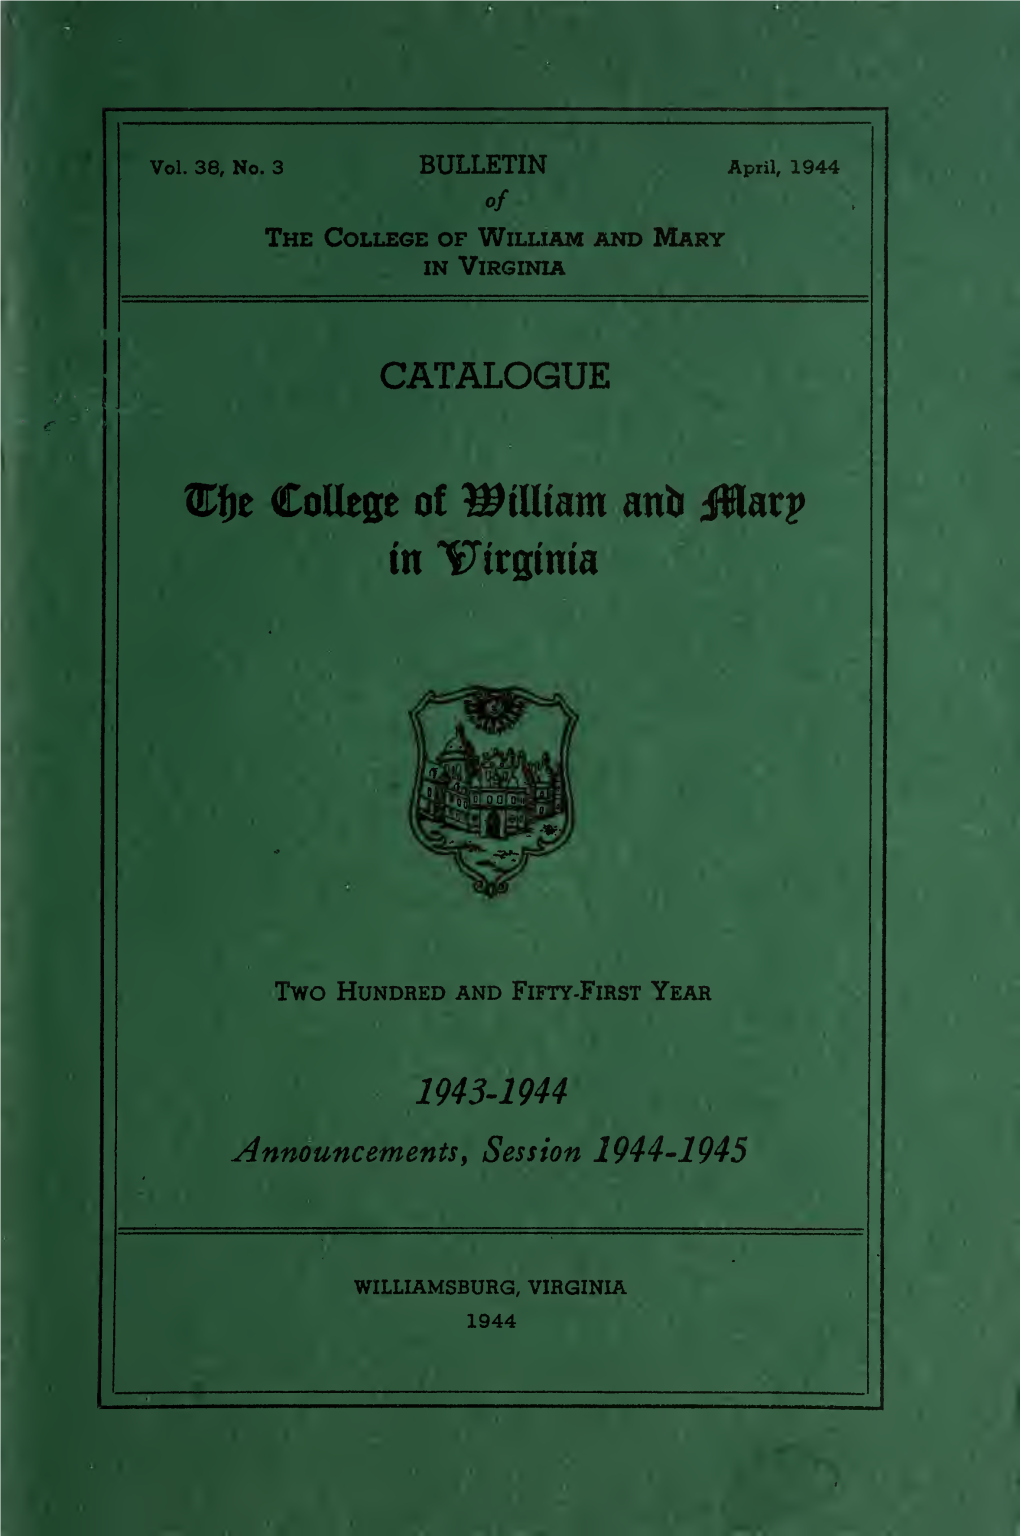 Bulletin of the College of William and Mary in Virginia